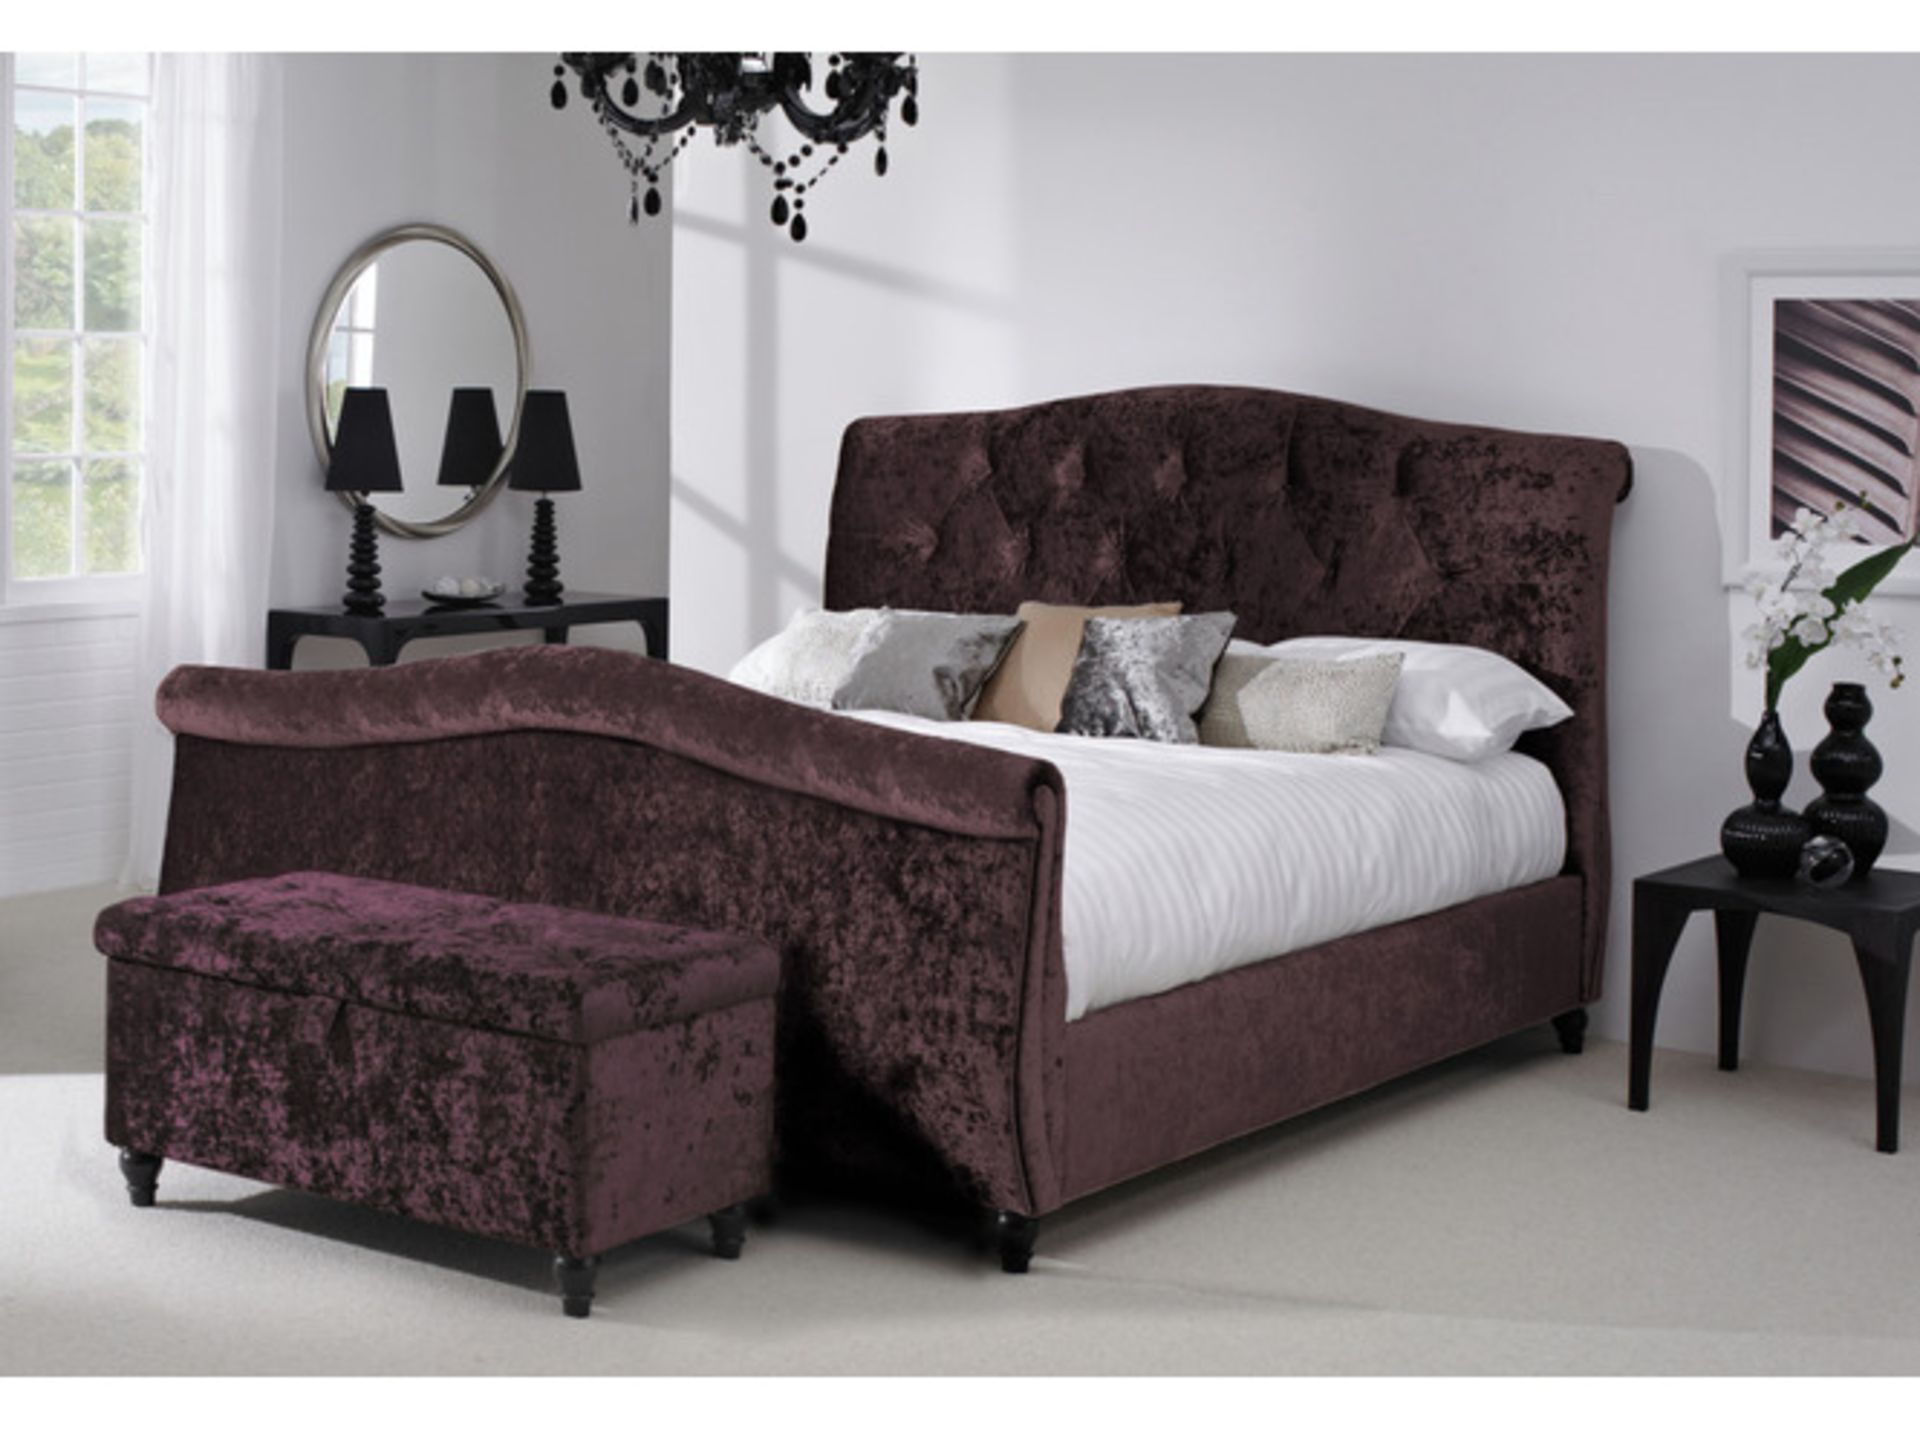 Brand new boxed direct from the manufacturers the 5'0 kingsize hestia rhapsody bedstead is furmanacs